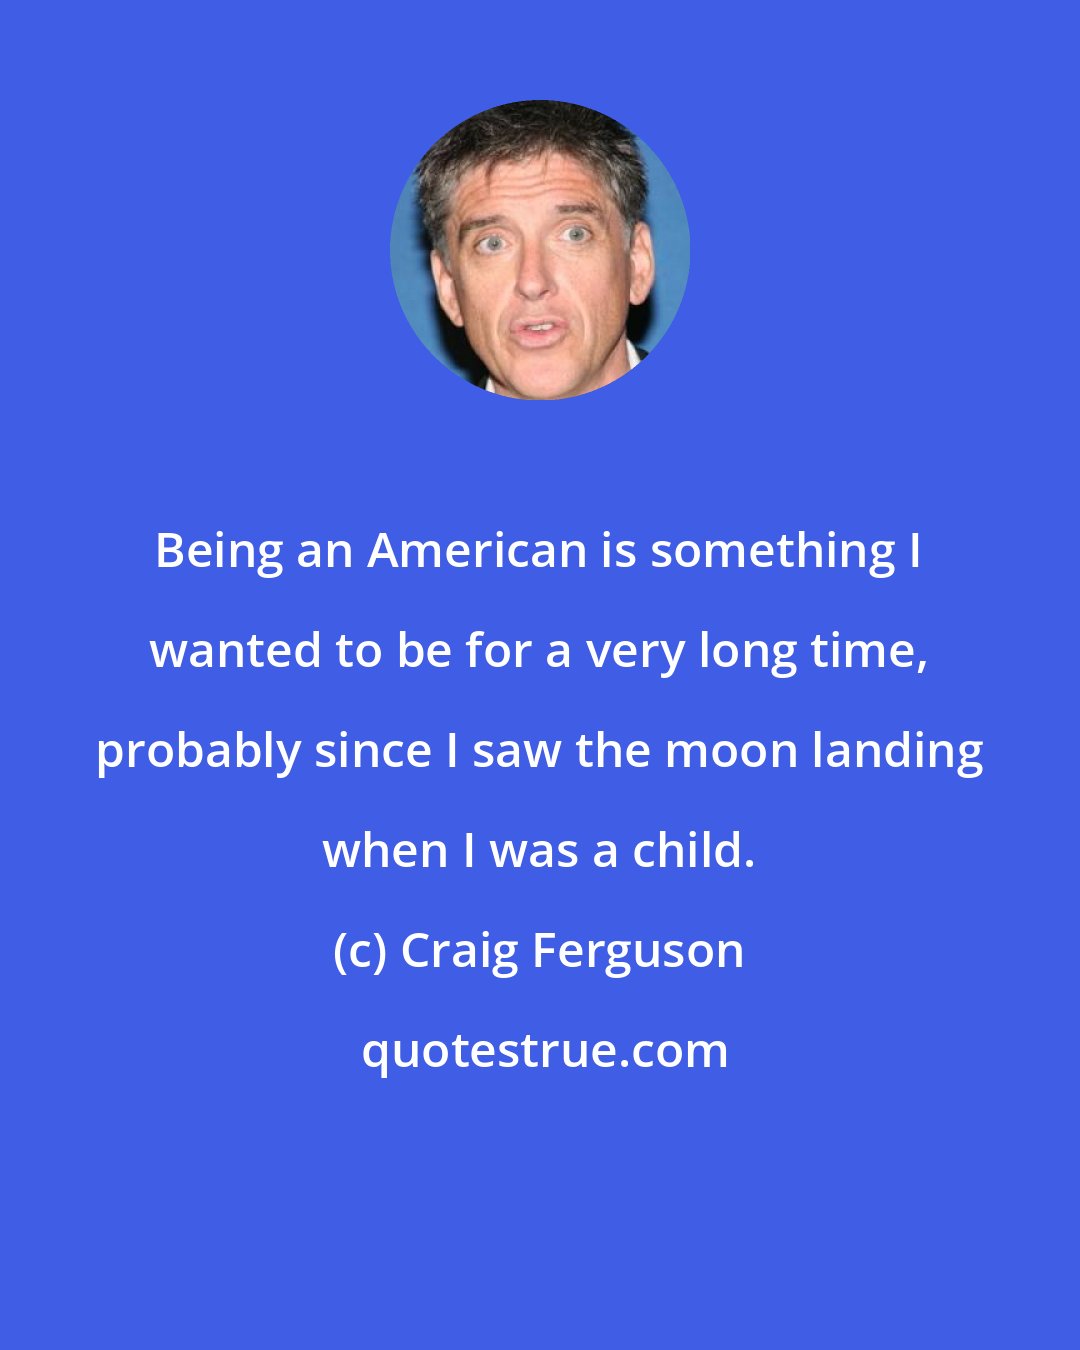 Craig Ferguson: Being an American is something I wanted to be for a very long time, probably since I saw the moon landing when I was a child.